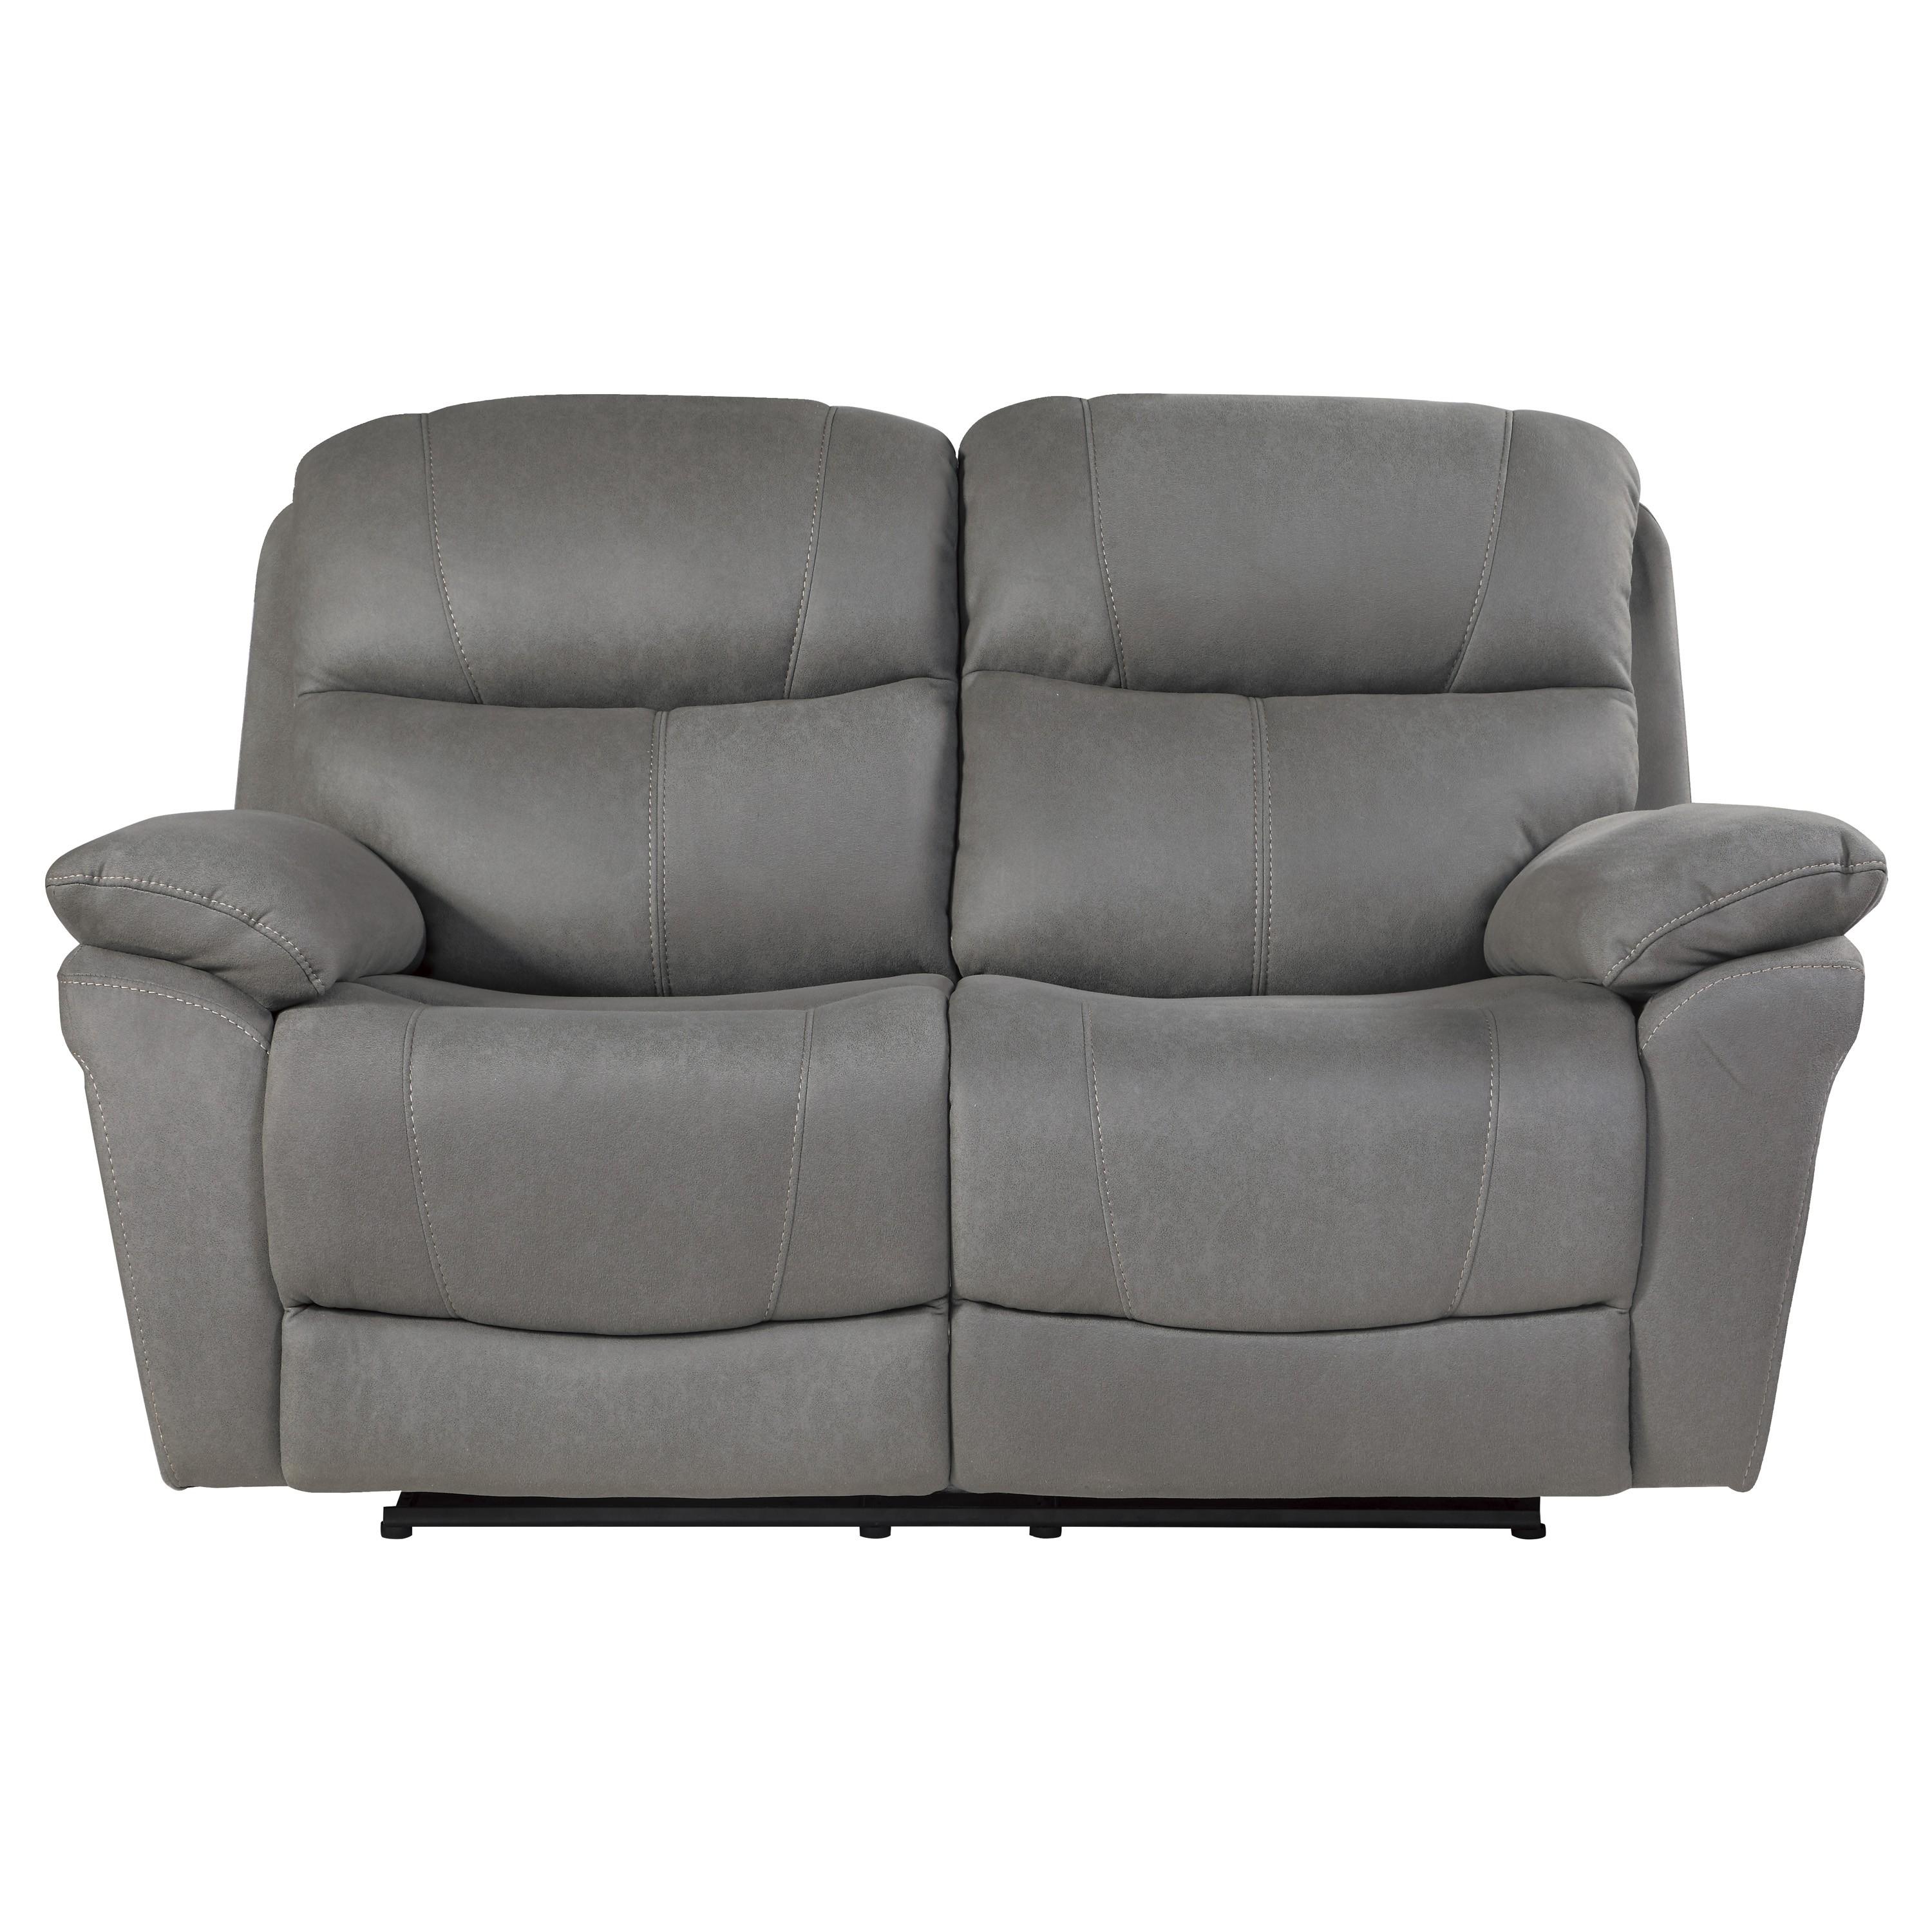 Transitional Power Reclining Loveseat 9580GY-2PWH Longvale 9580GY-2PWH in Gray Microfiber